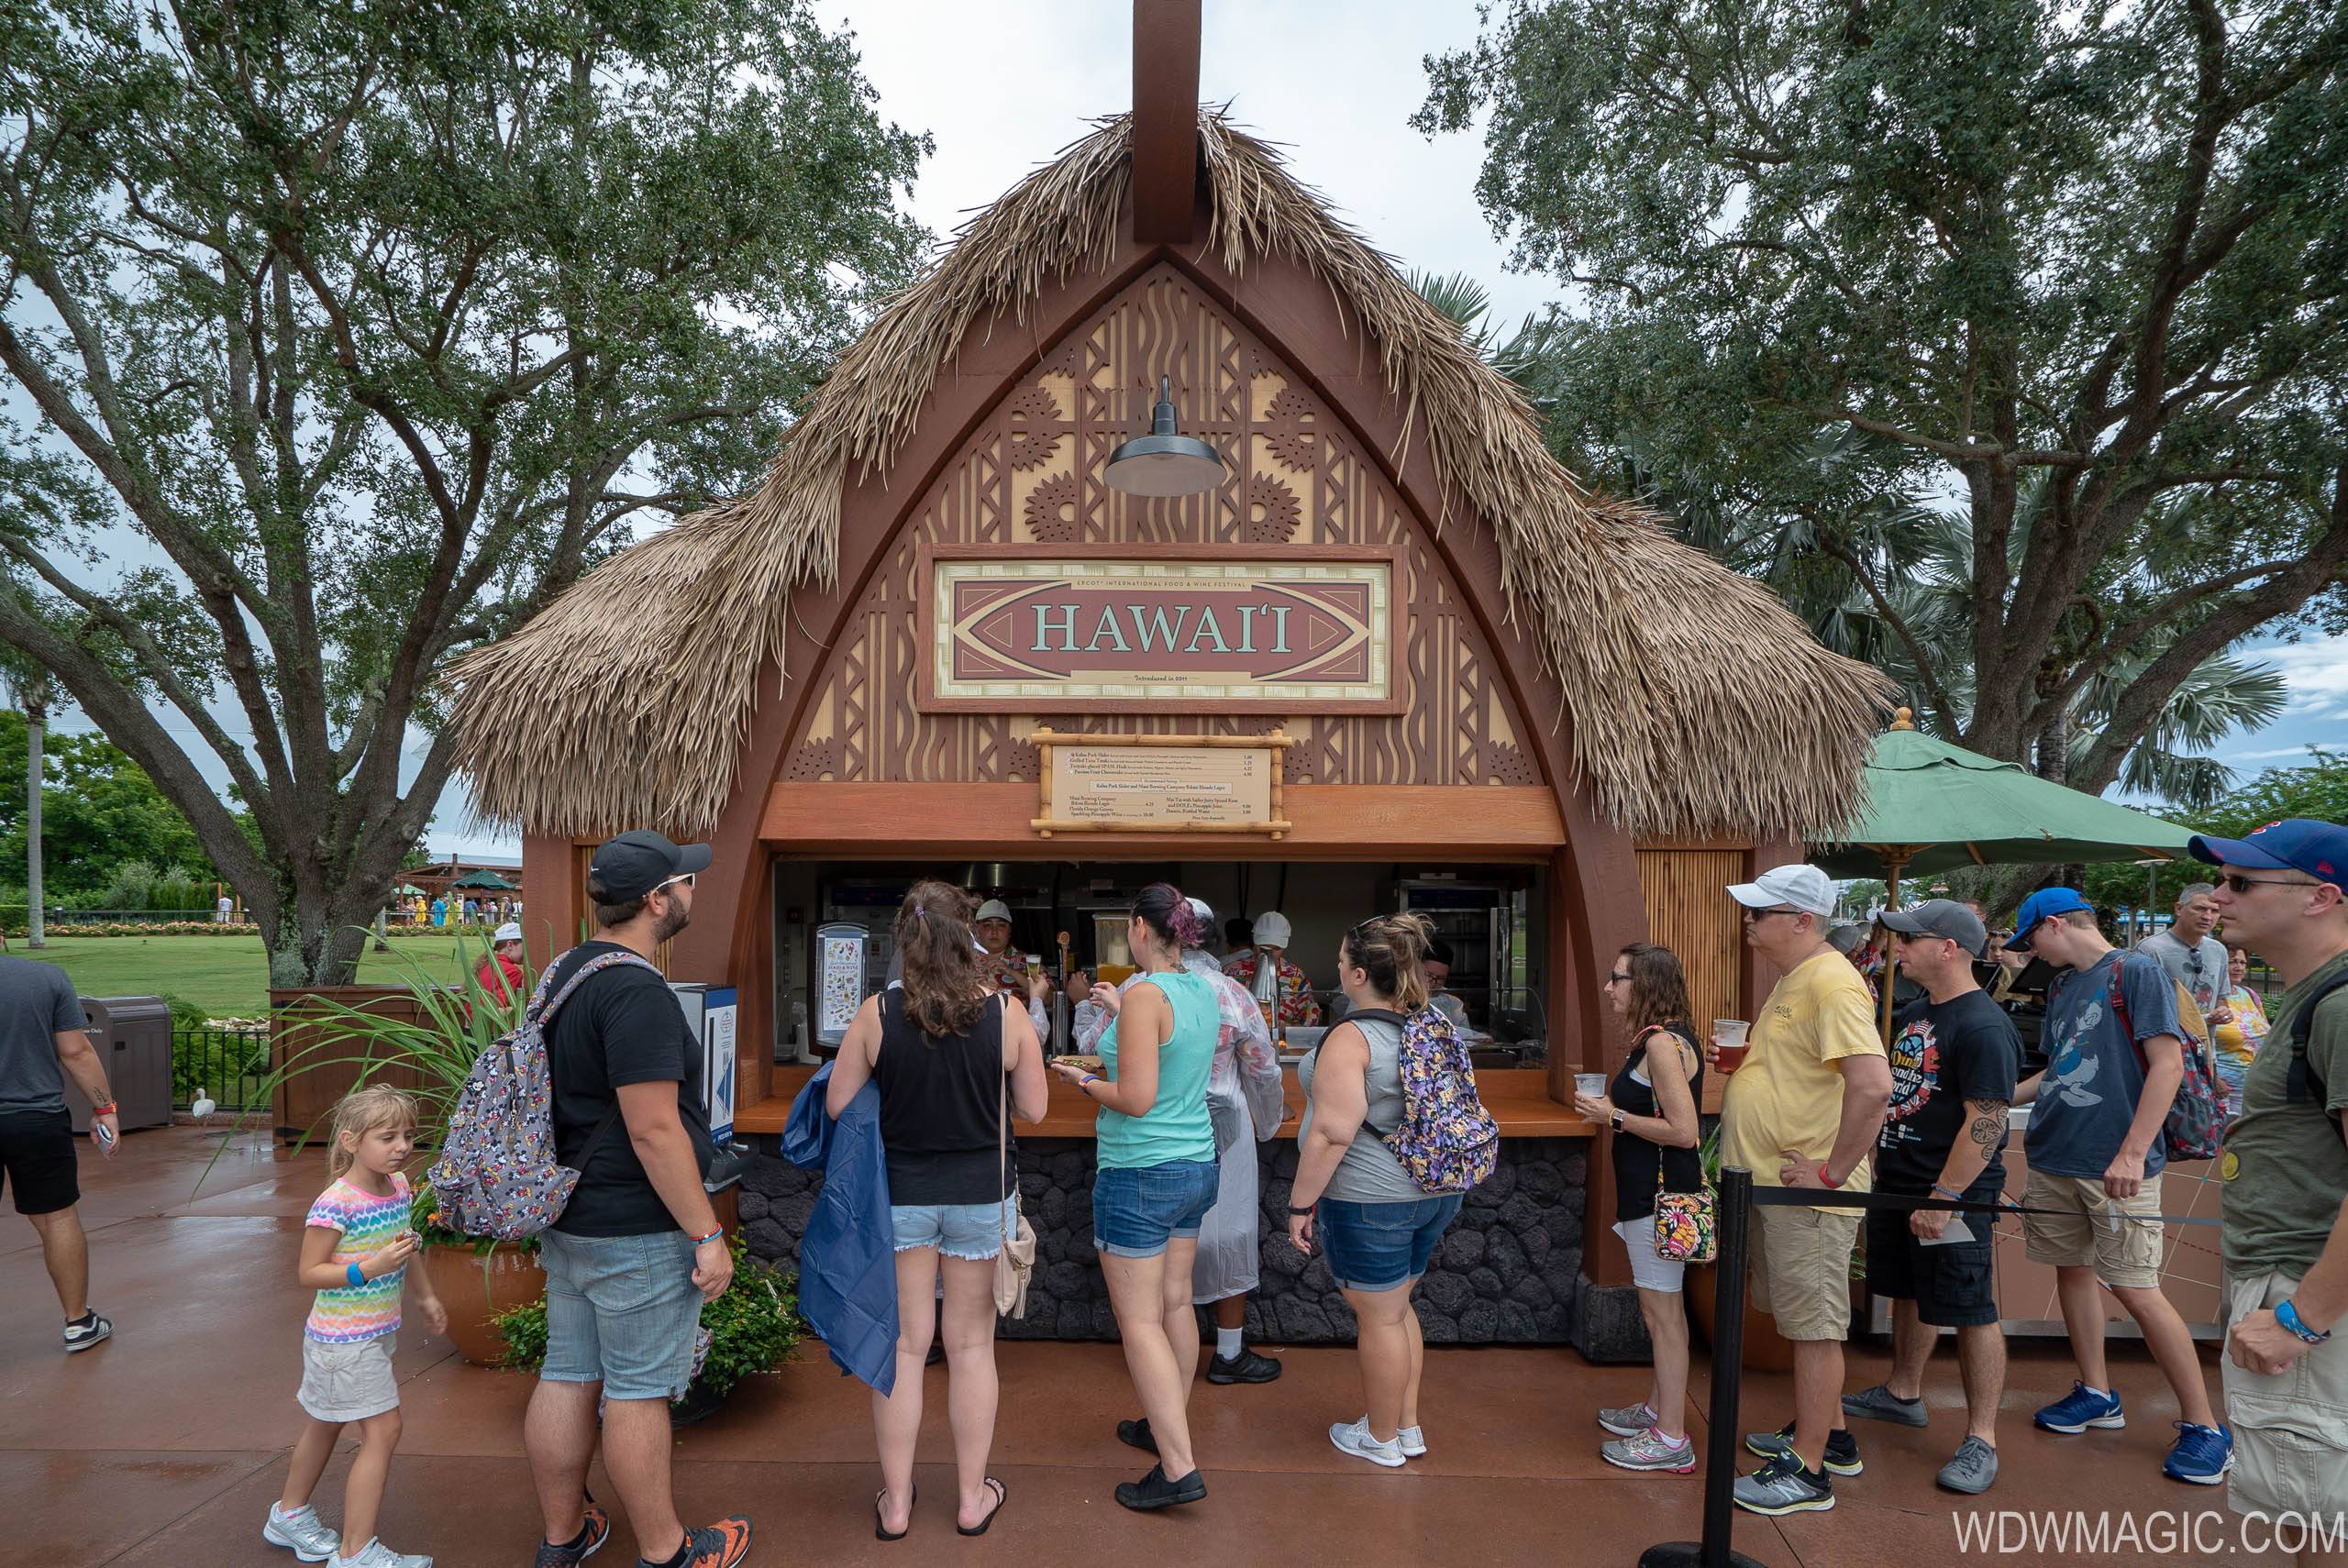 2018 Epcot Food and Wine Festival Marketplace kiosks, menus and pricing